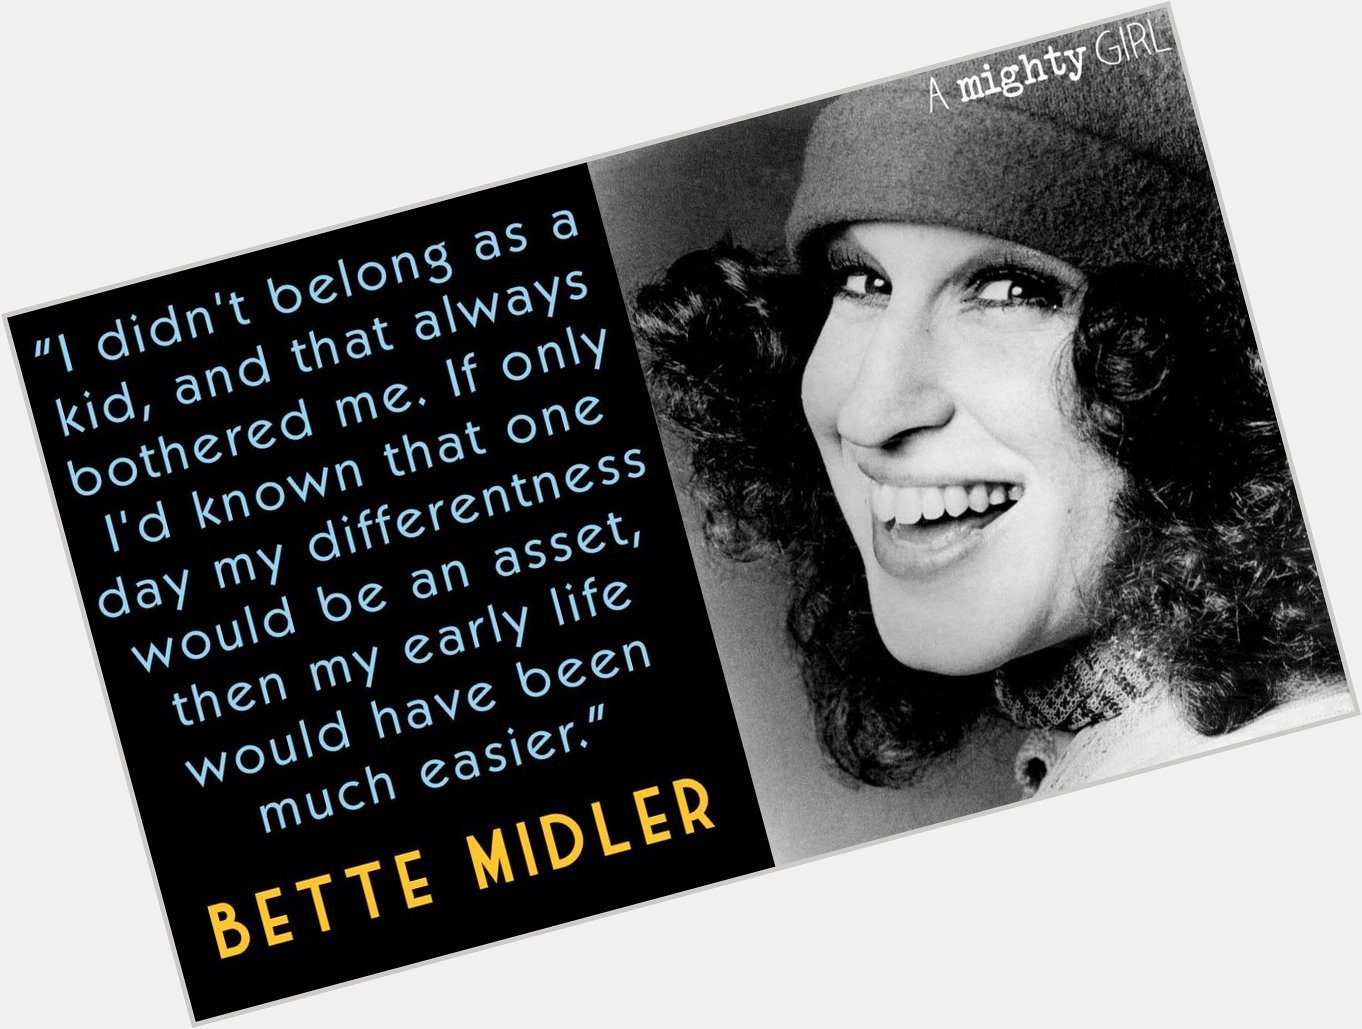 A Mighty Girl wishes Bette Midler, 3-time Grammy Award winner, a very happy birthday!  